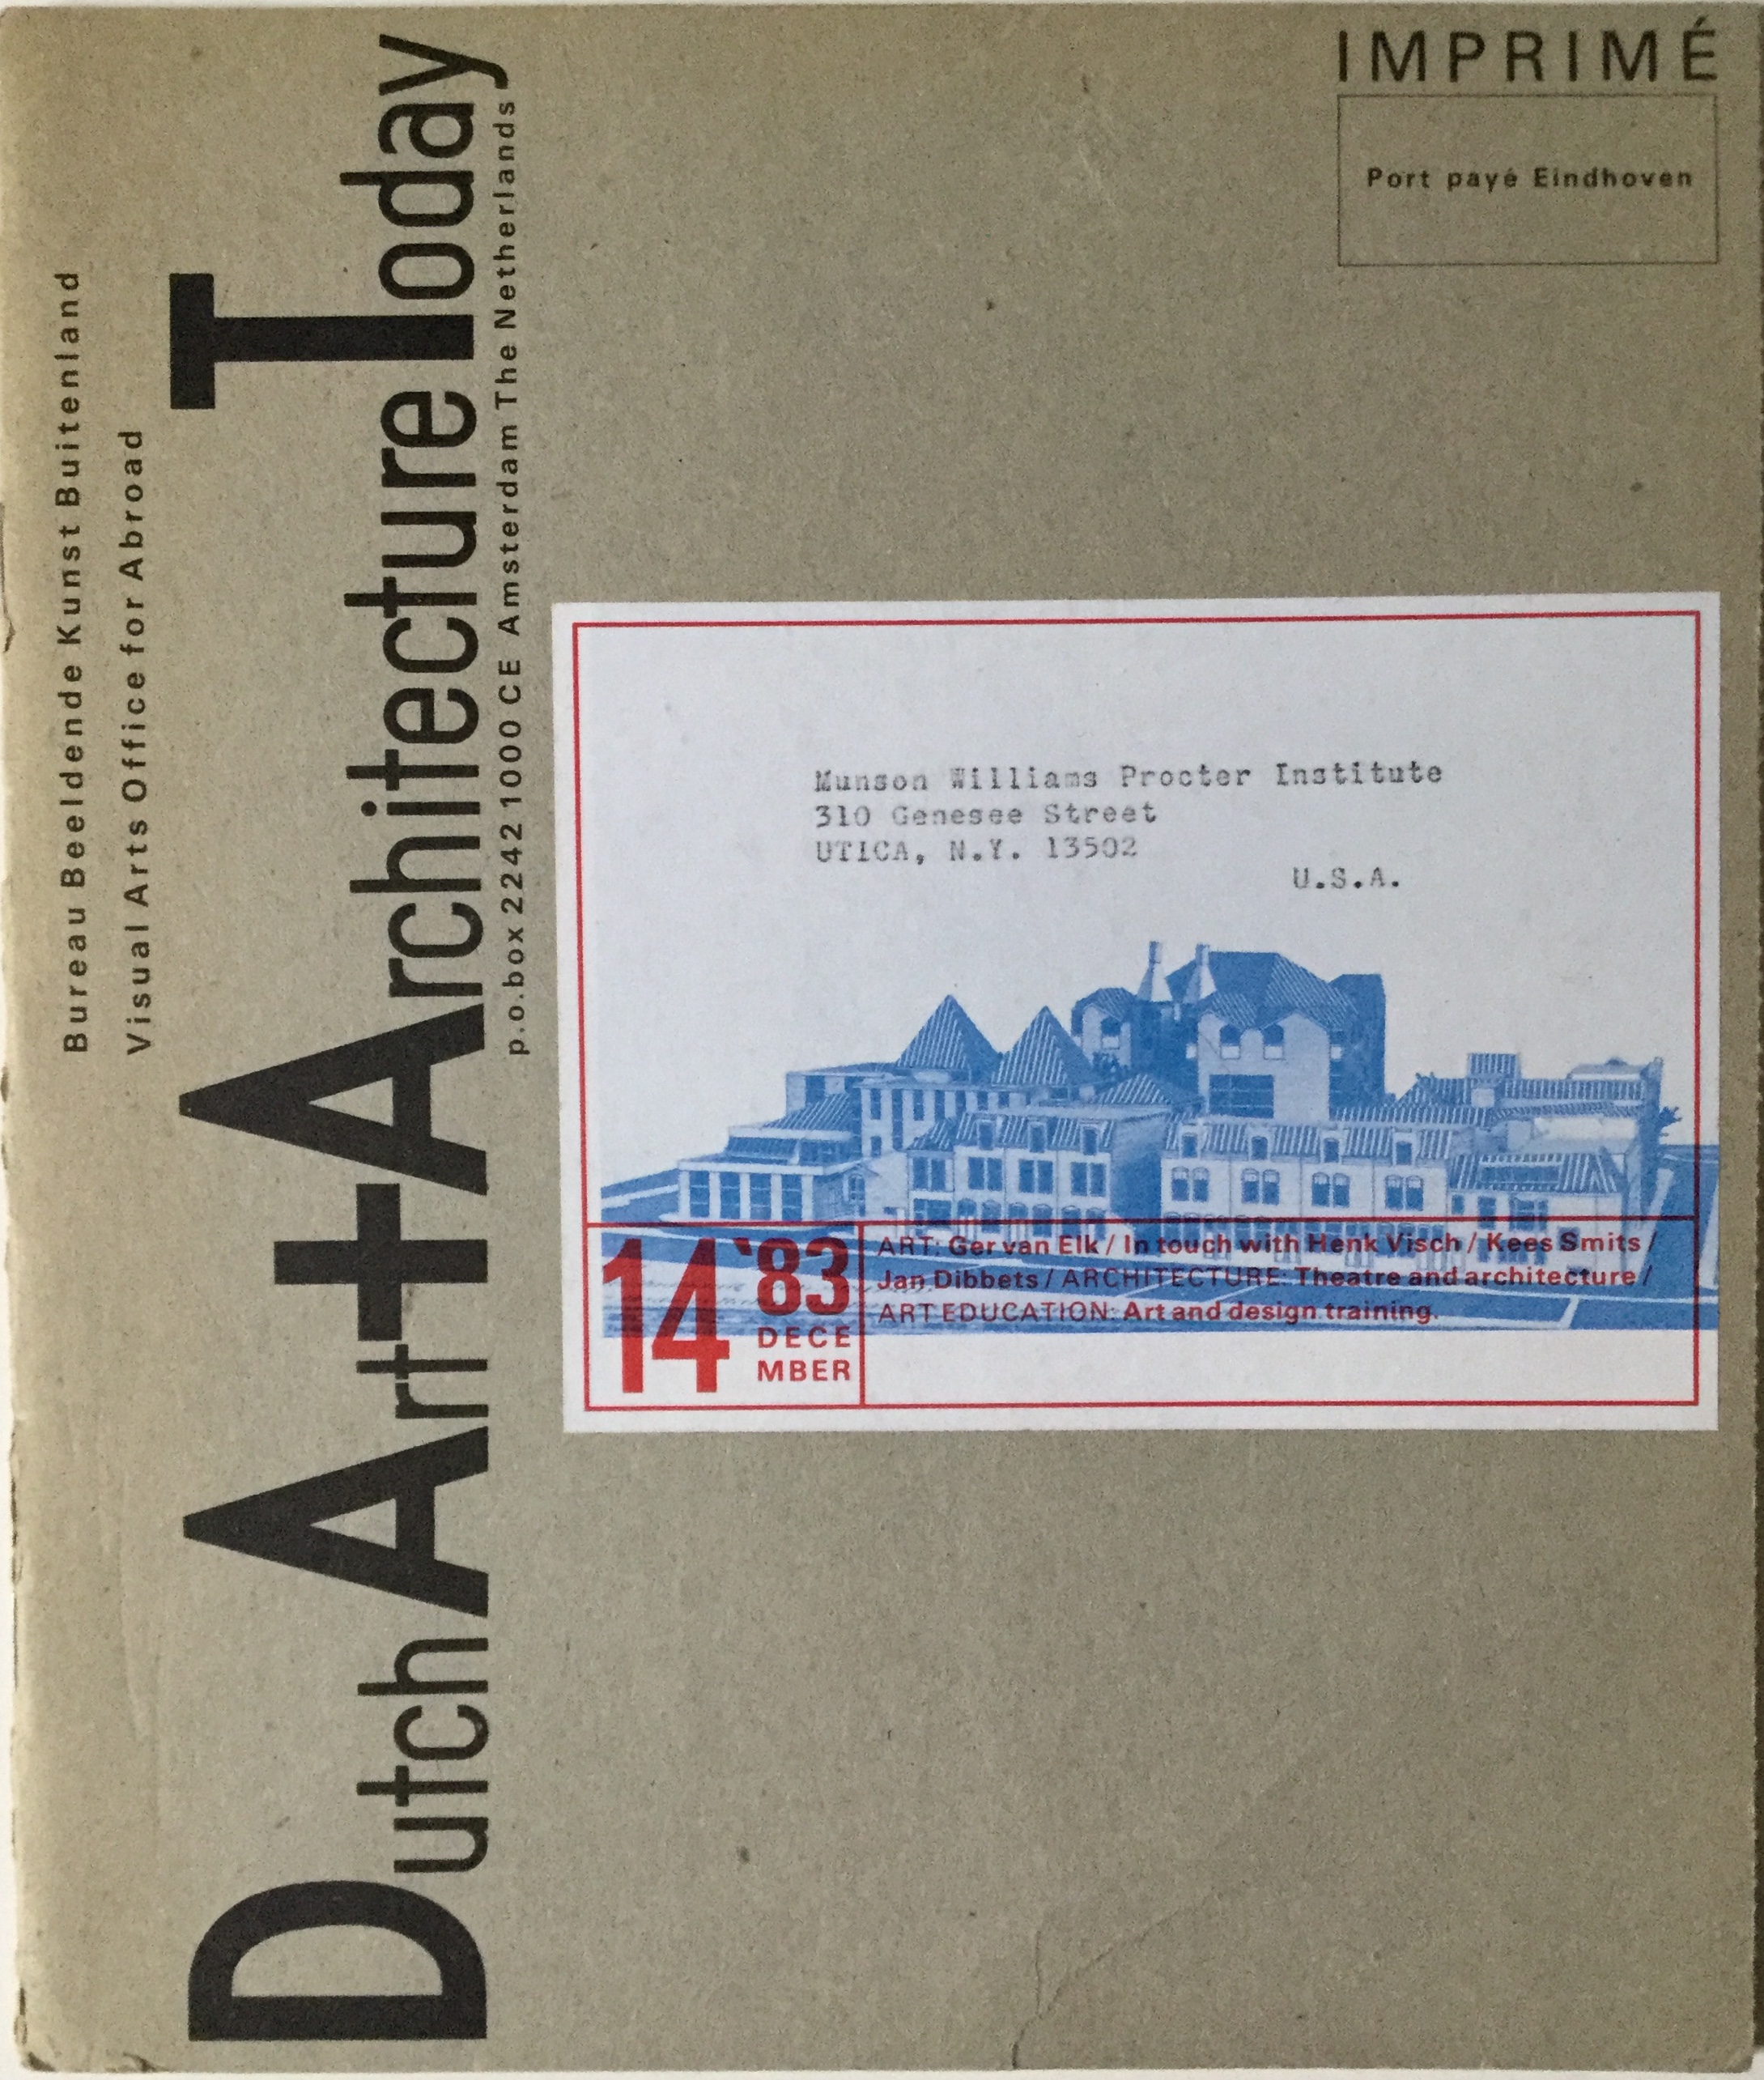 J443	DUTCH ART AND ARCHITECTURE TODAY NO. 14 DECEMBER 1983